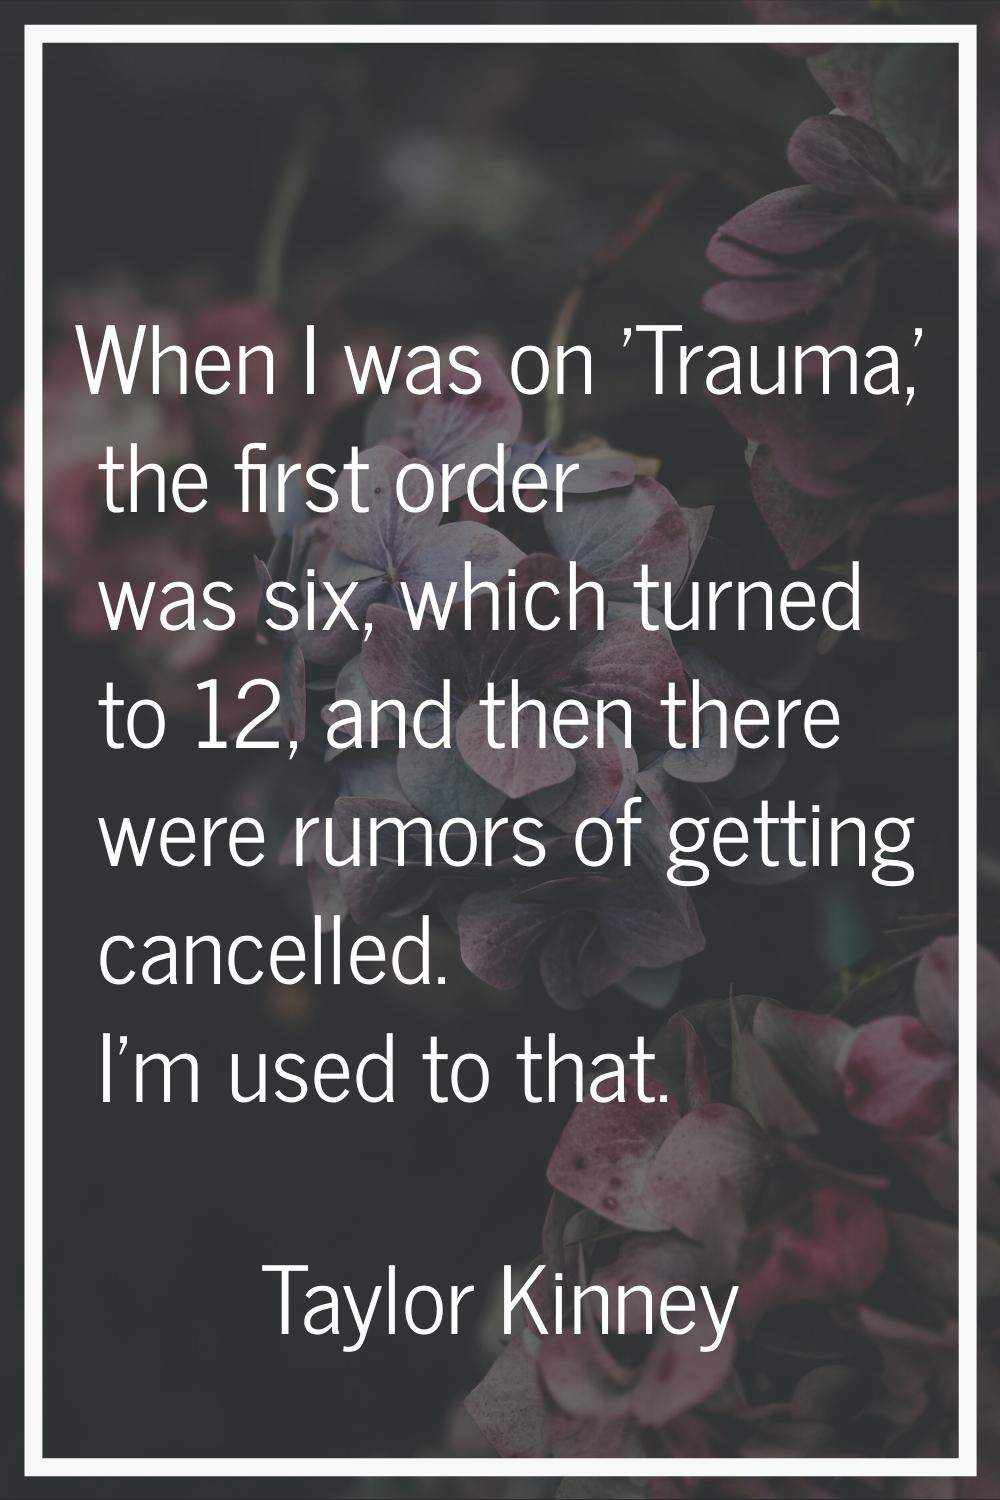 When I was on 'Trauma,' the first order was six, which turned to 12, and then there were rumors of 